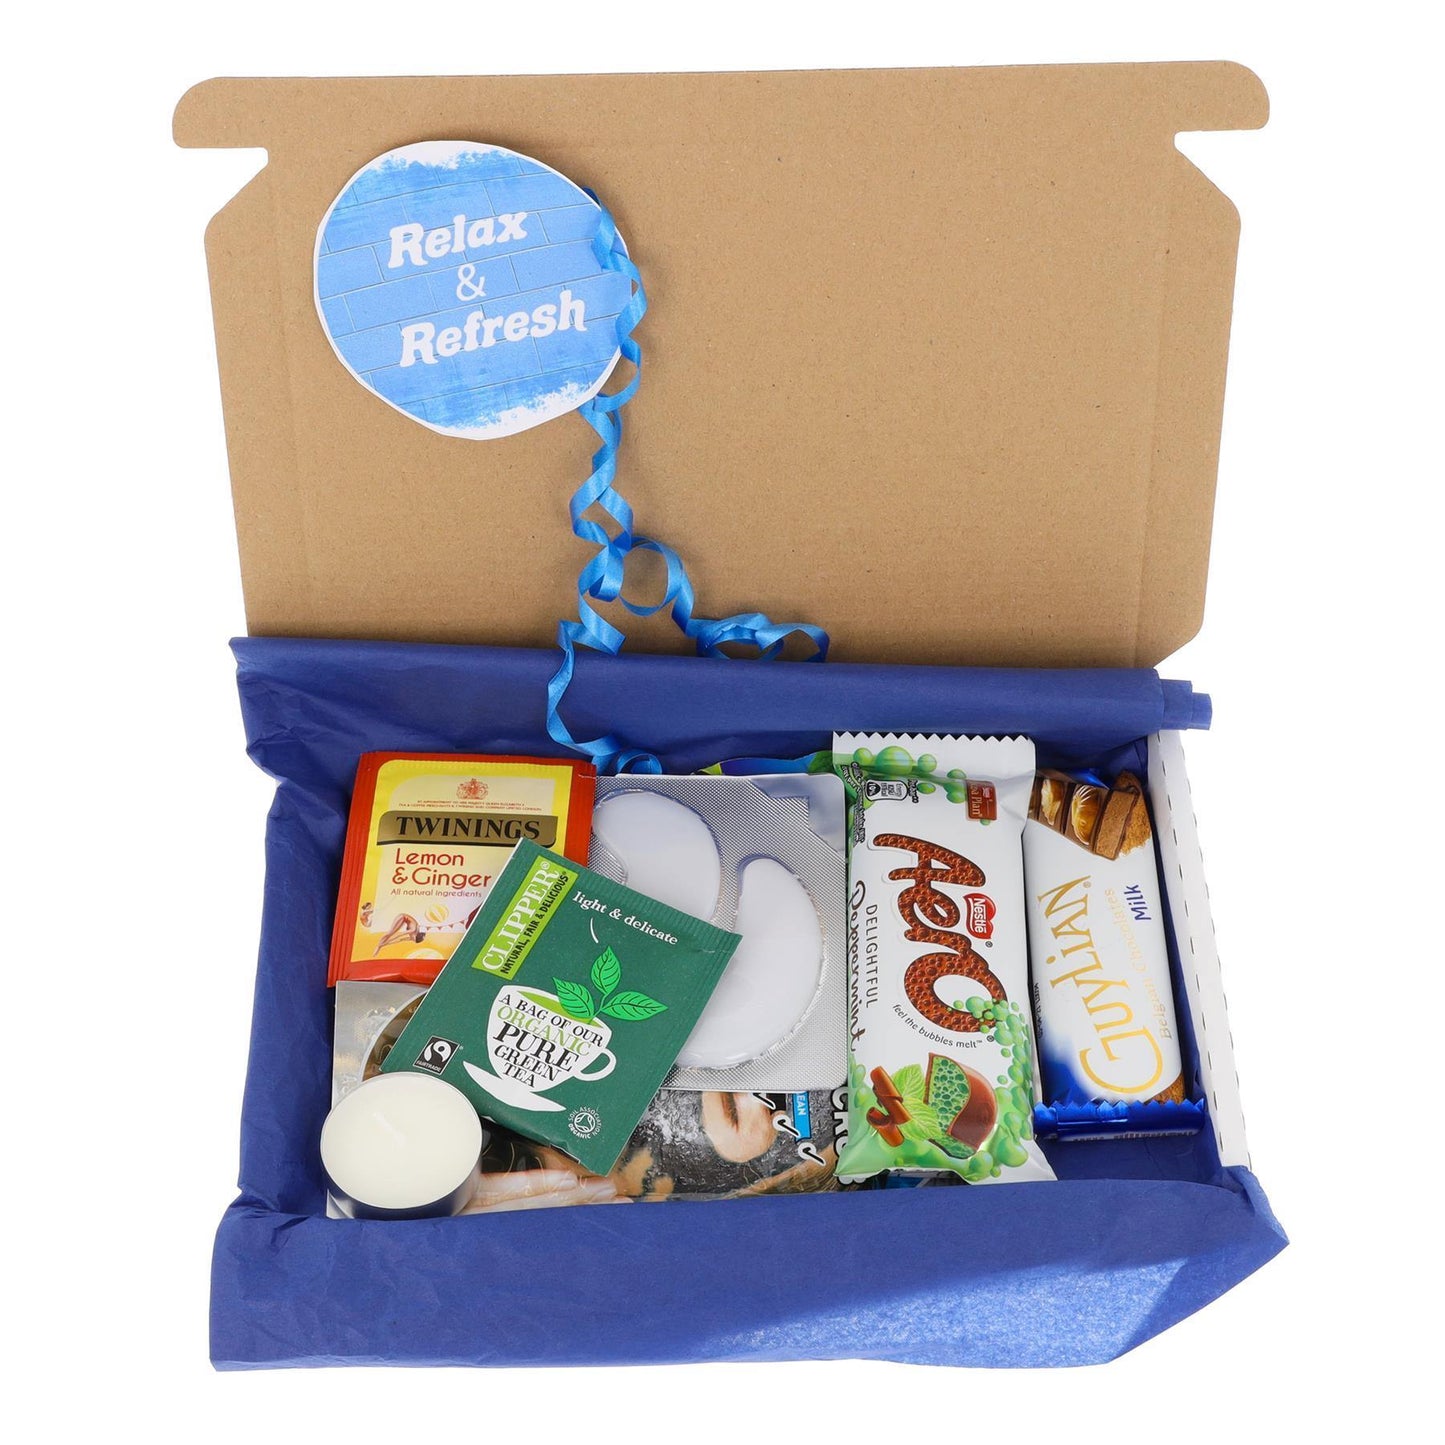 Pamper Treat & Sweet Box for Men Letterbox Gift  - Always Looking Good -   